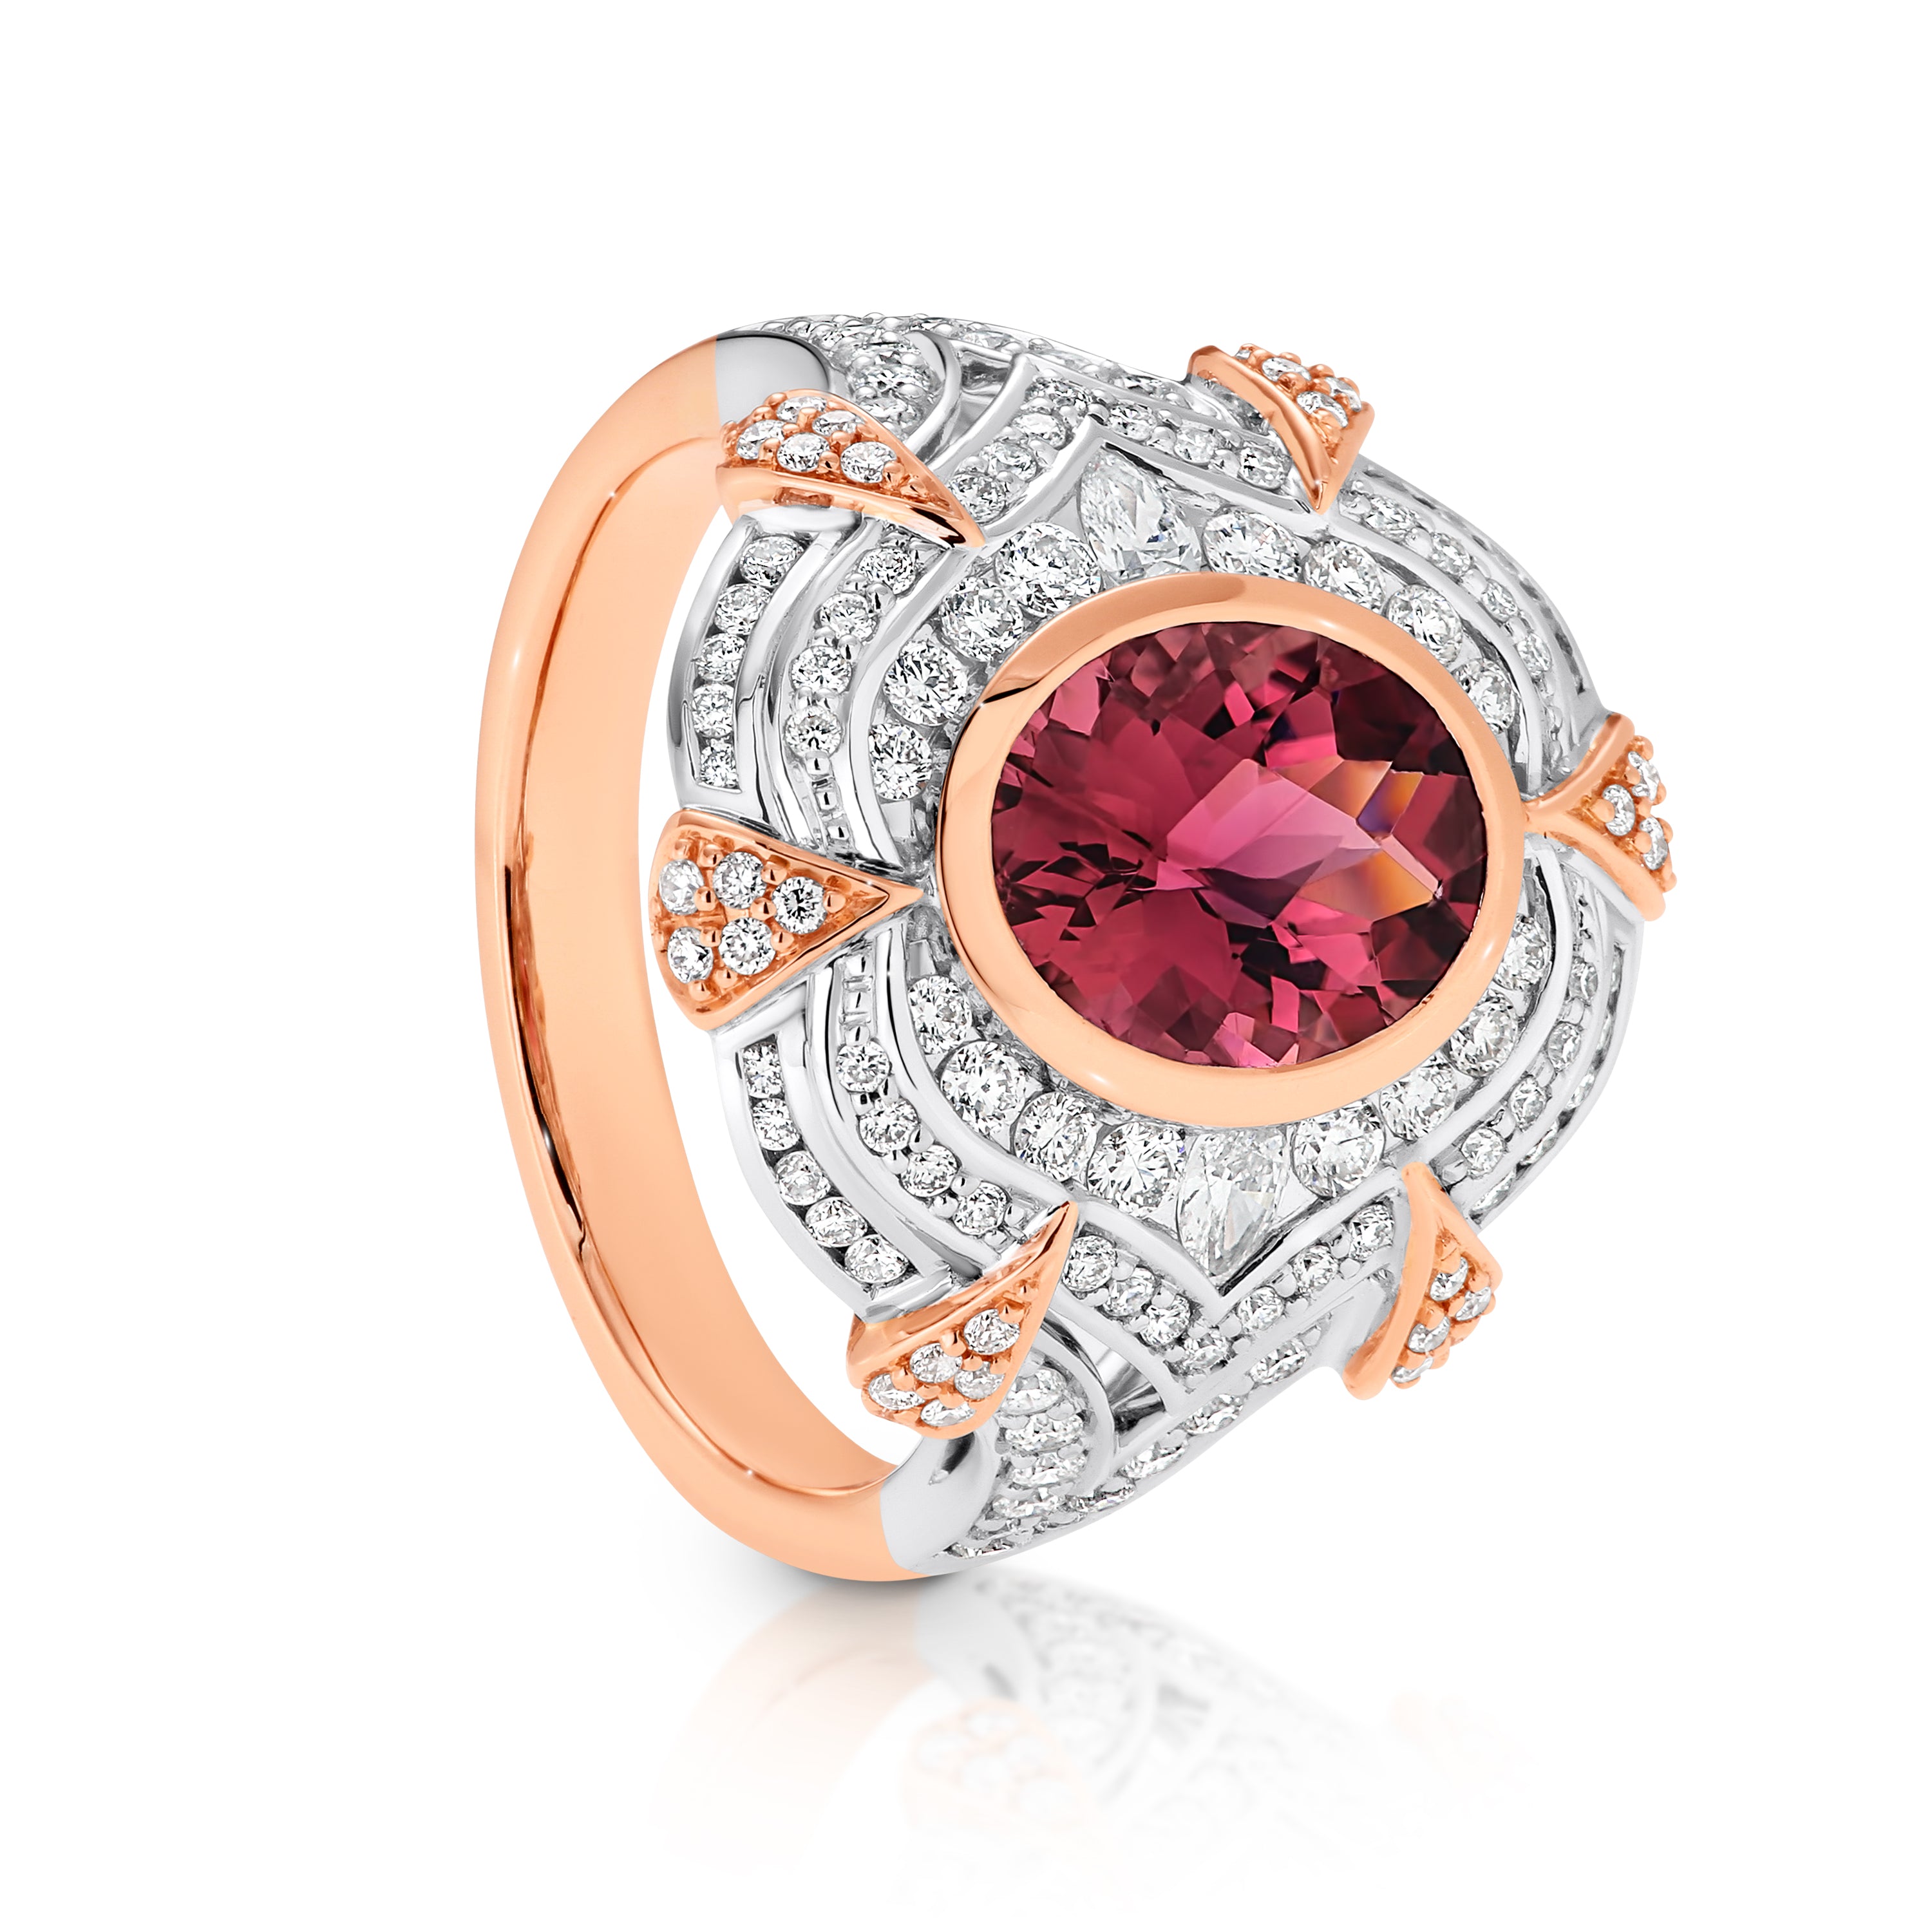 The Dahlia Ring - Limited Edition